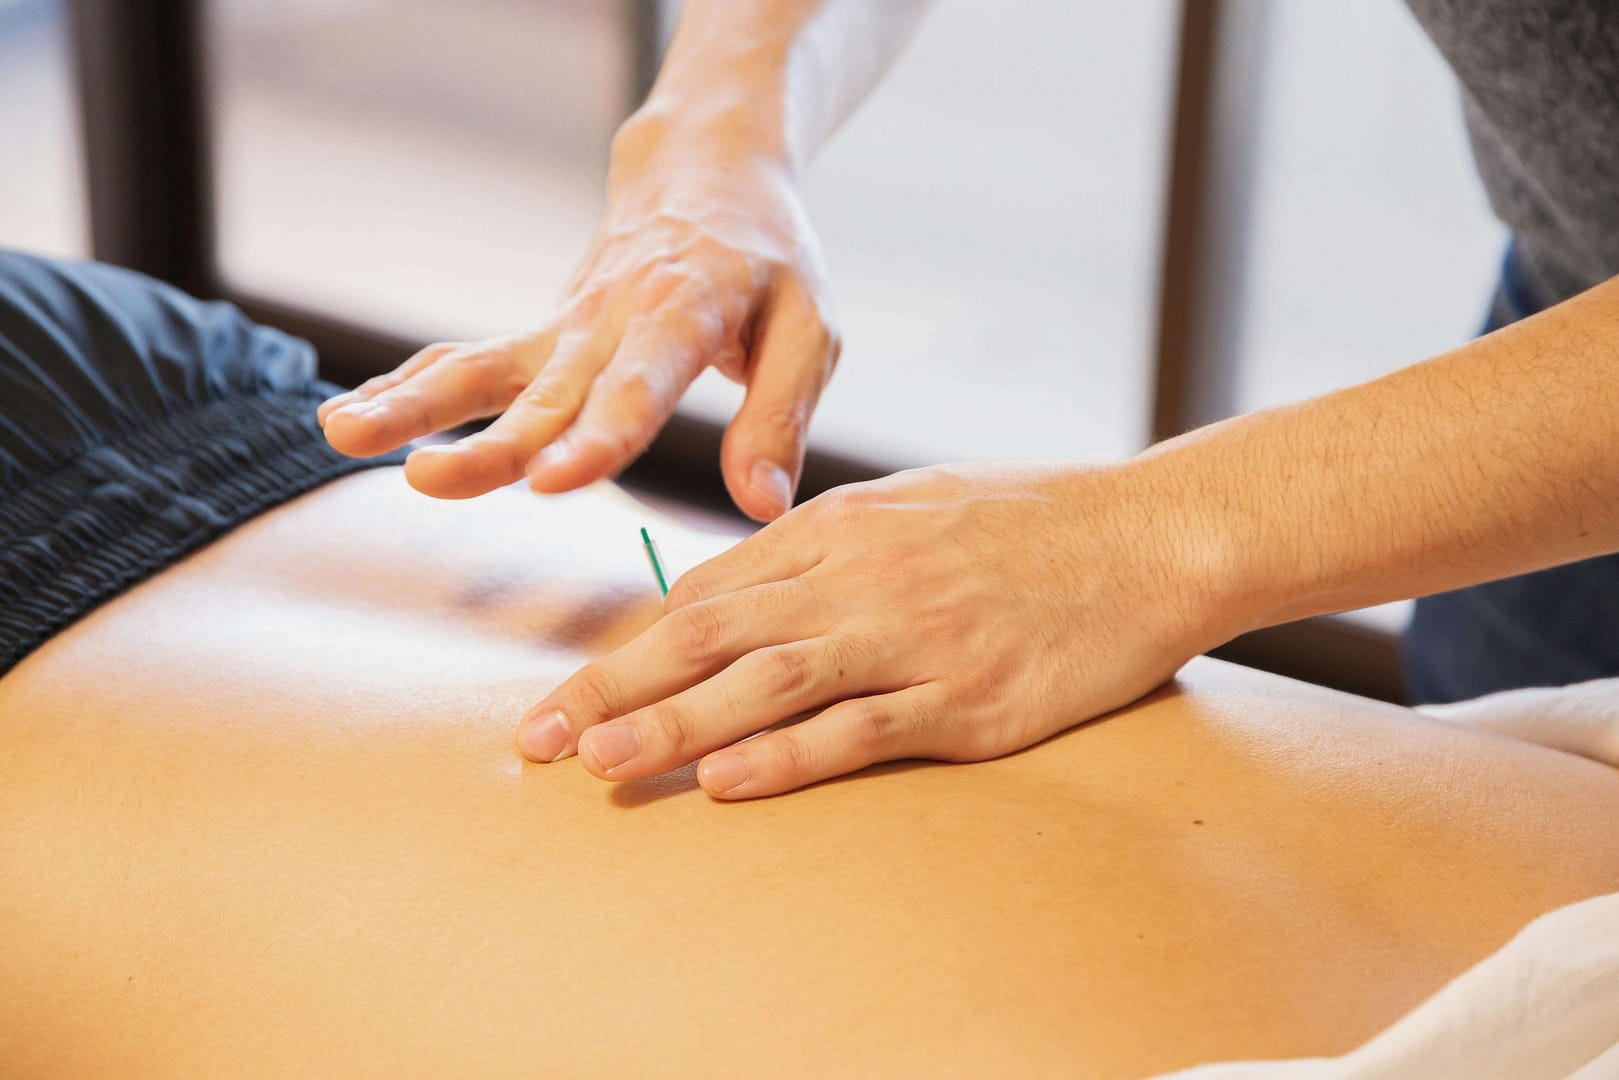 Alternative Therapies for Spinal Injury